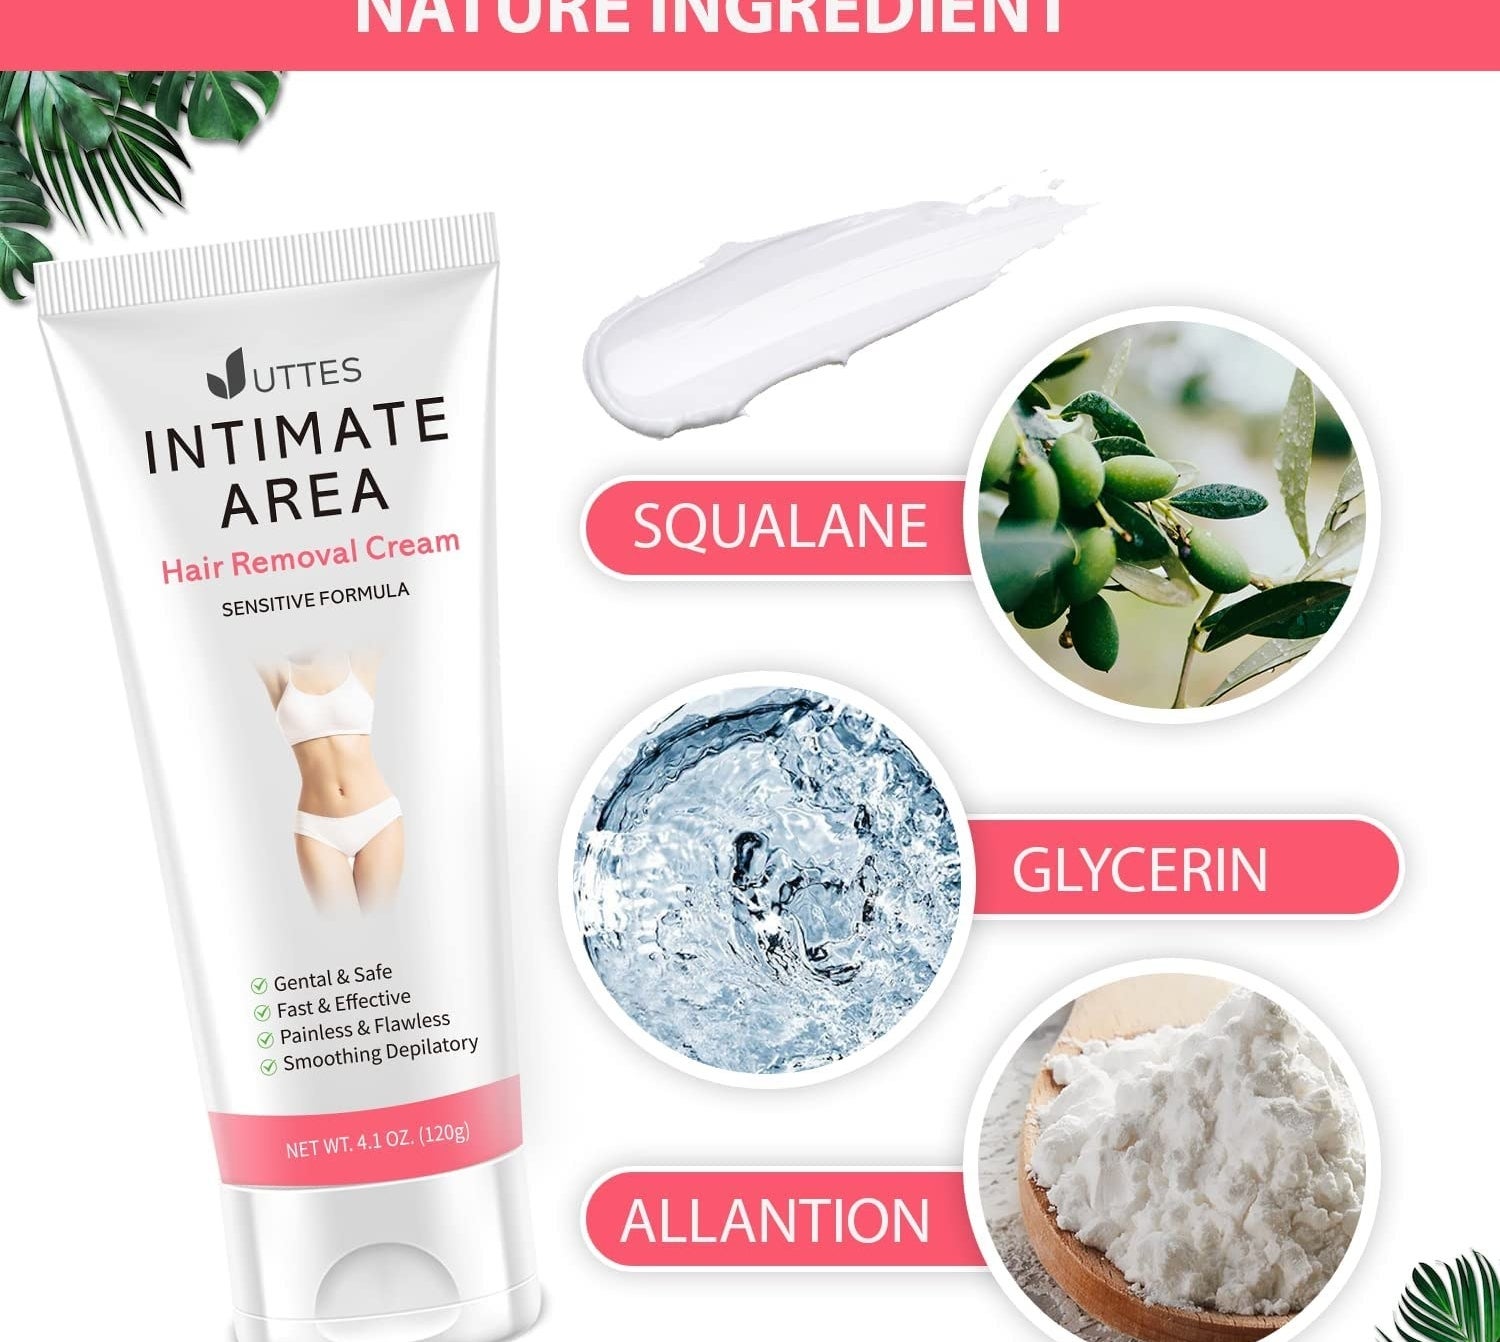 the bottle of hair removal cream and some of the natural ingredients in it